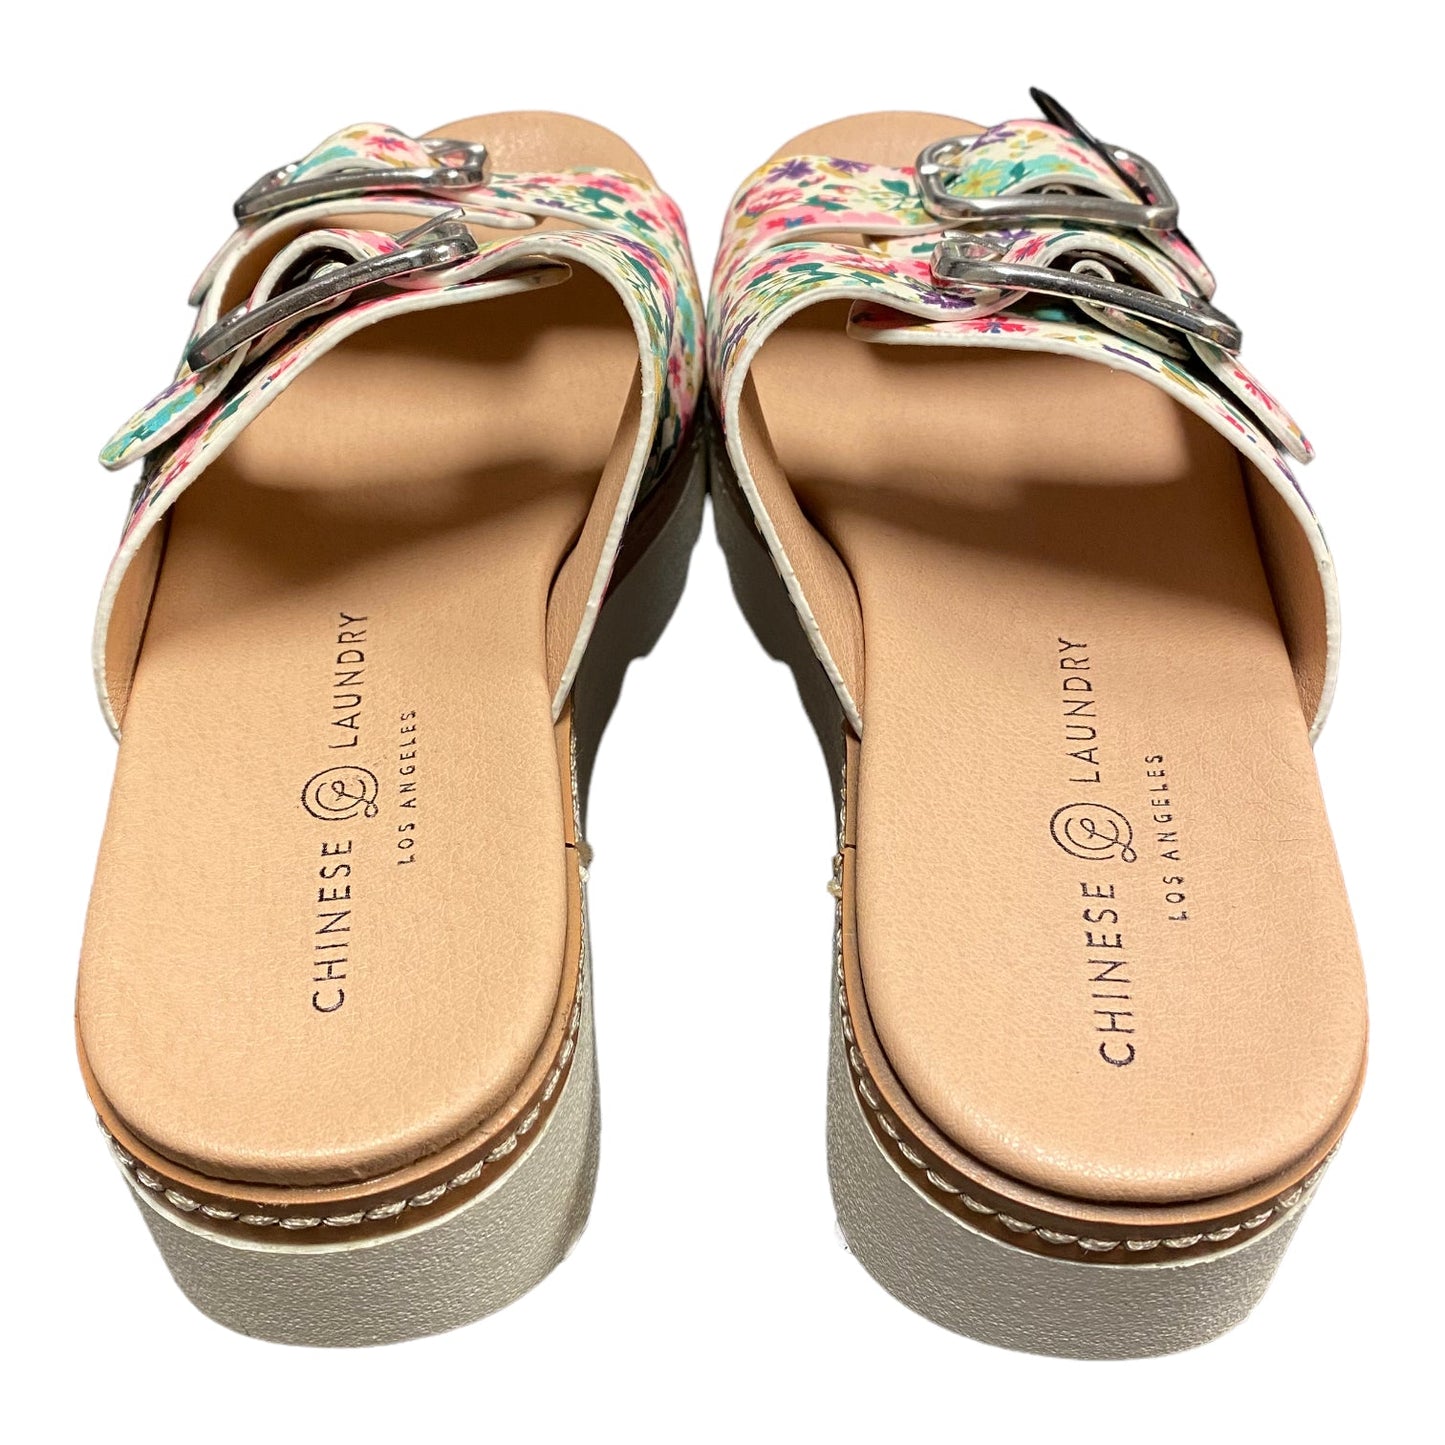 Floral Print Sandals Flats Chinese Laundry, Size 6.5